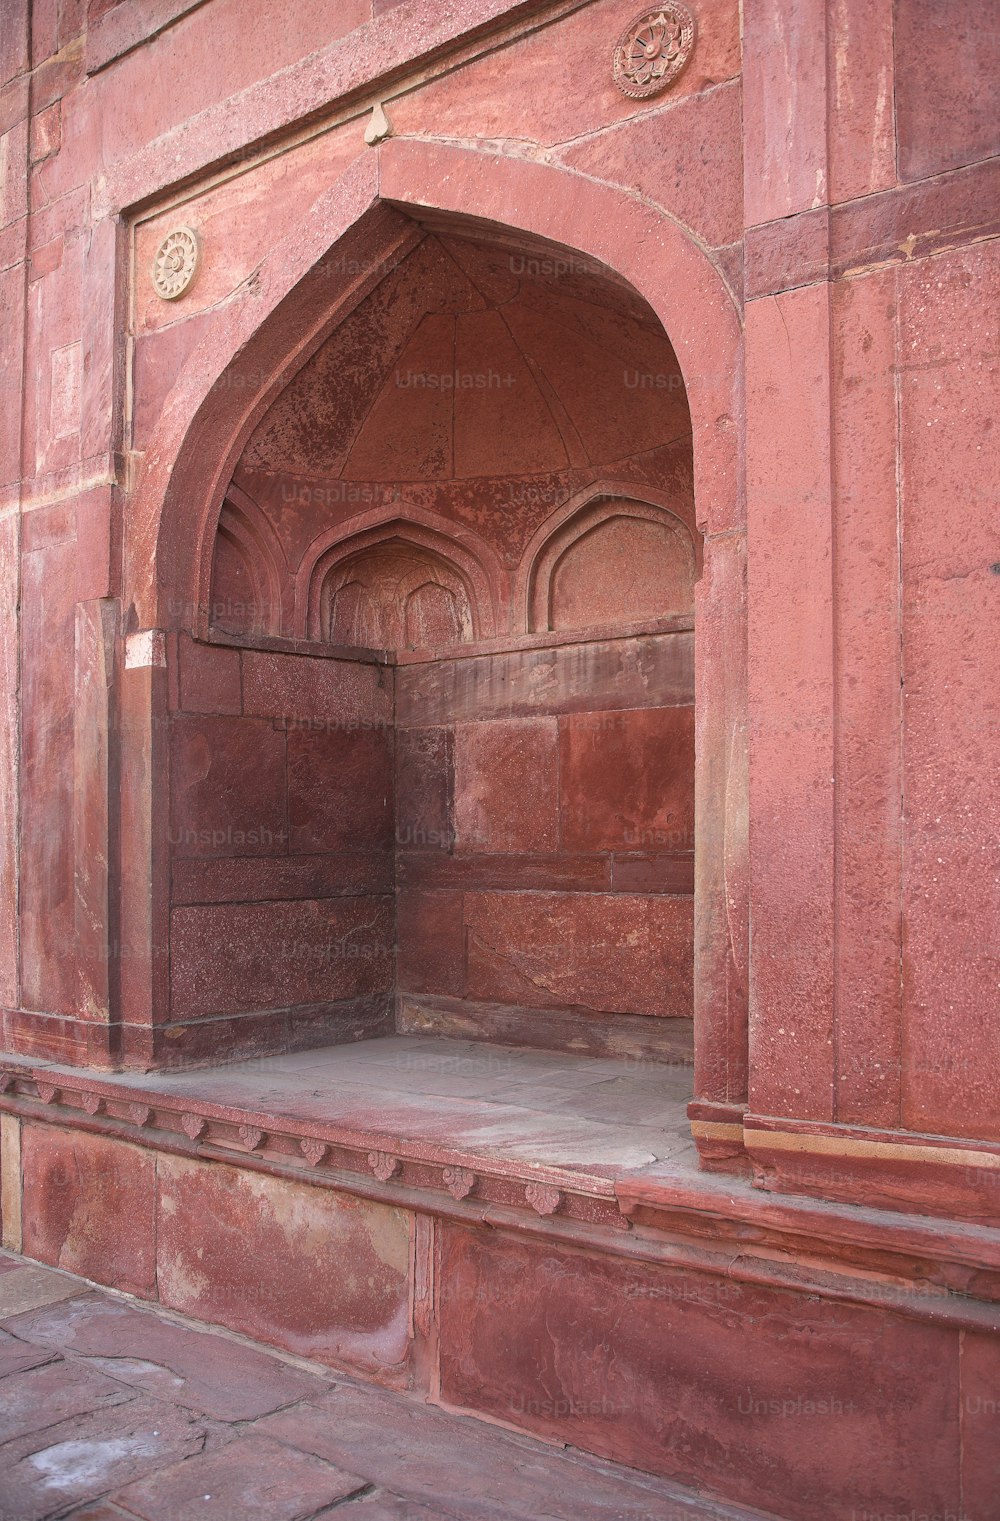 A photo of an old muslim building in India